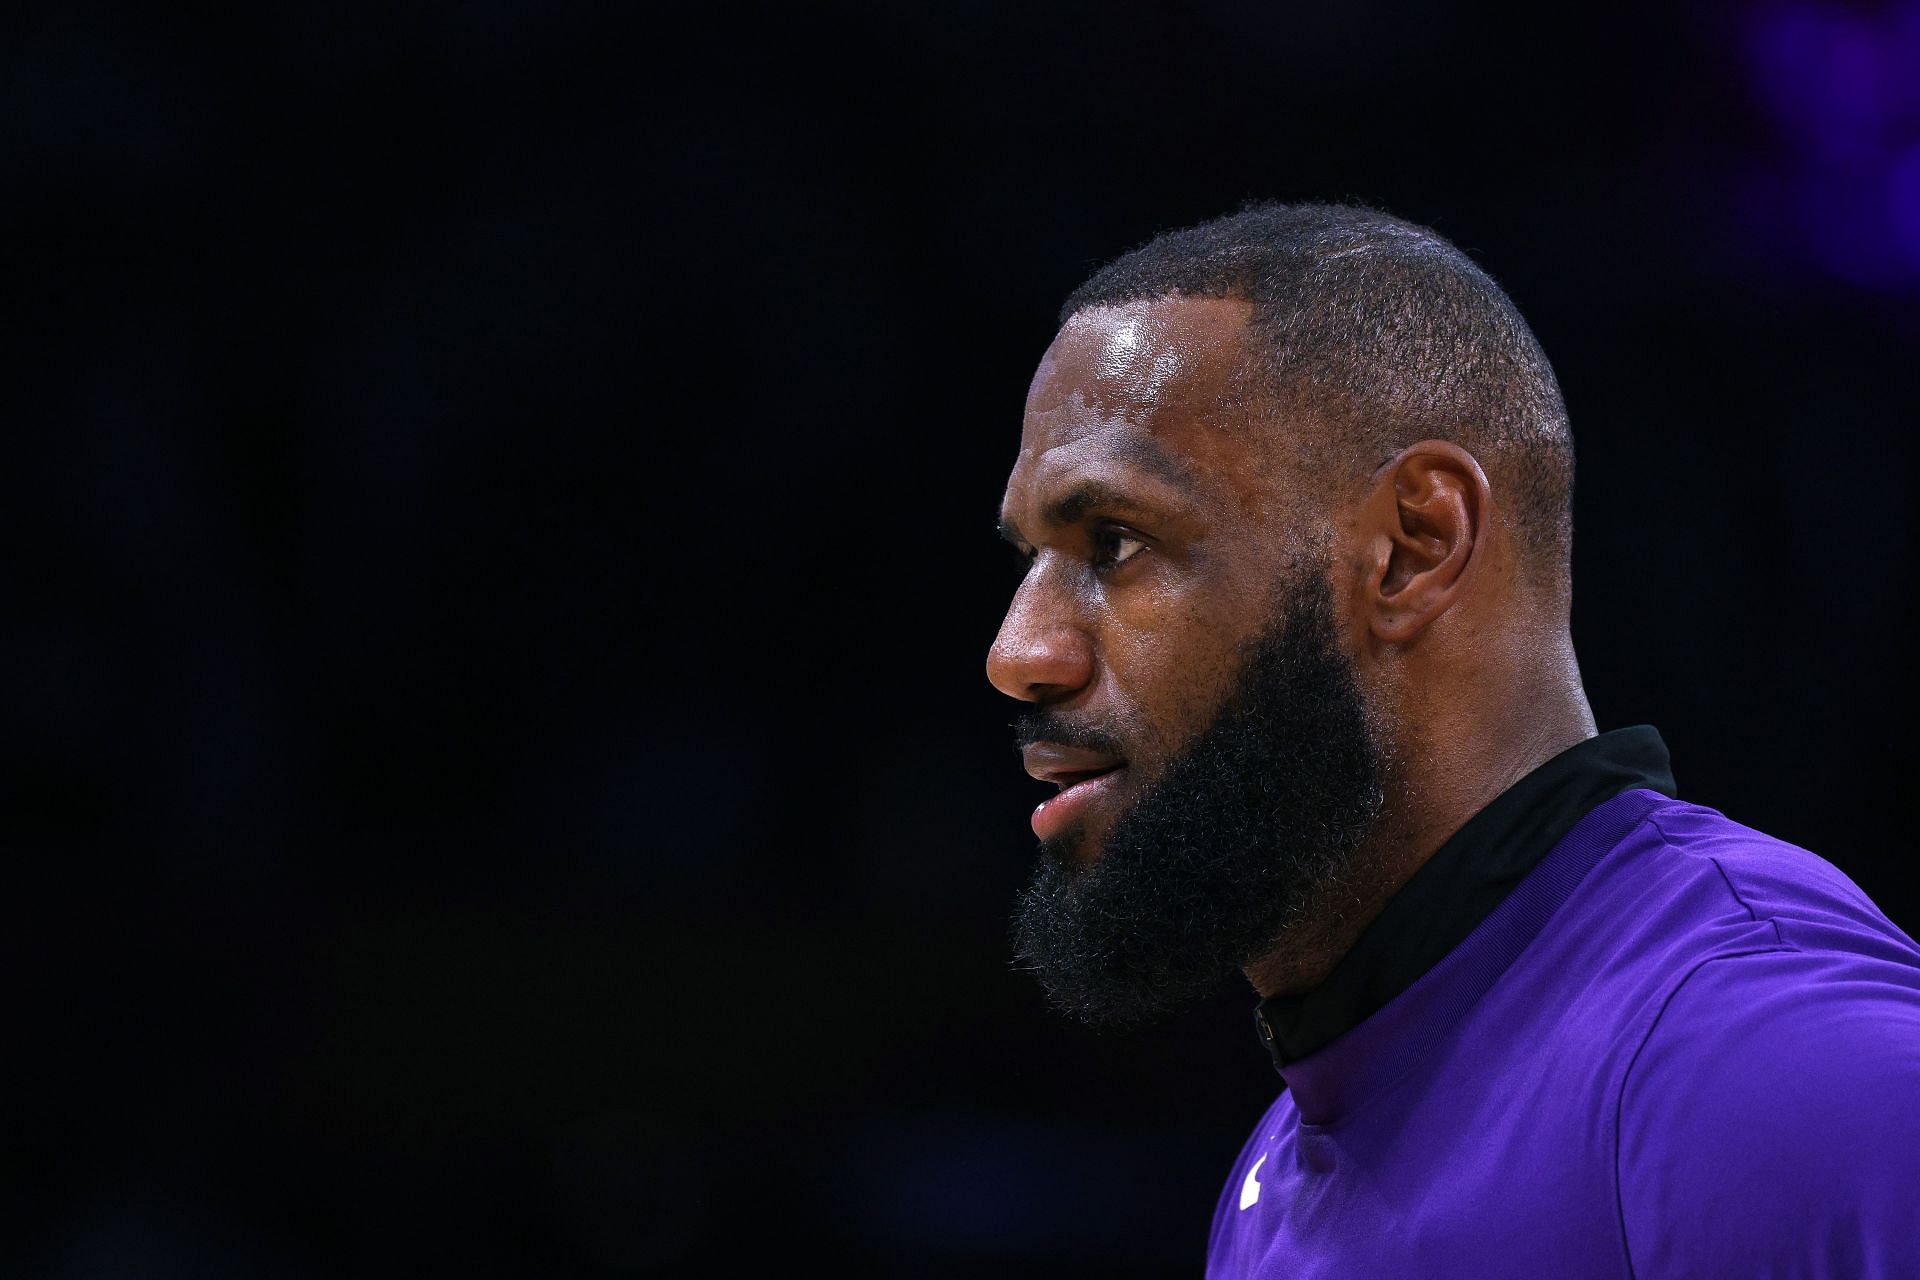 LeBron James carried the LA Lakers to a hard-earned Game 4 win over the Memphis Grizzlies.